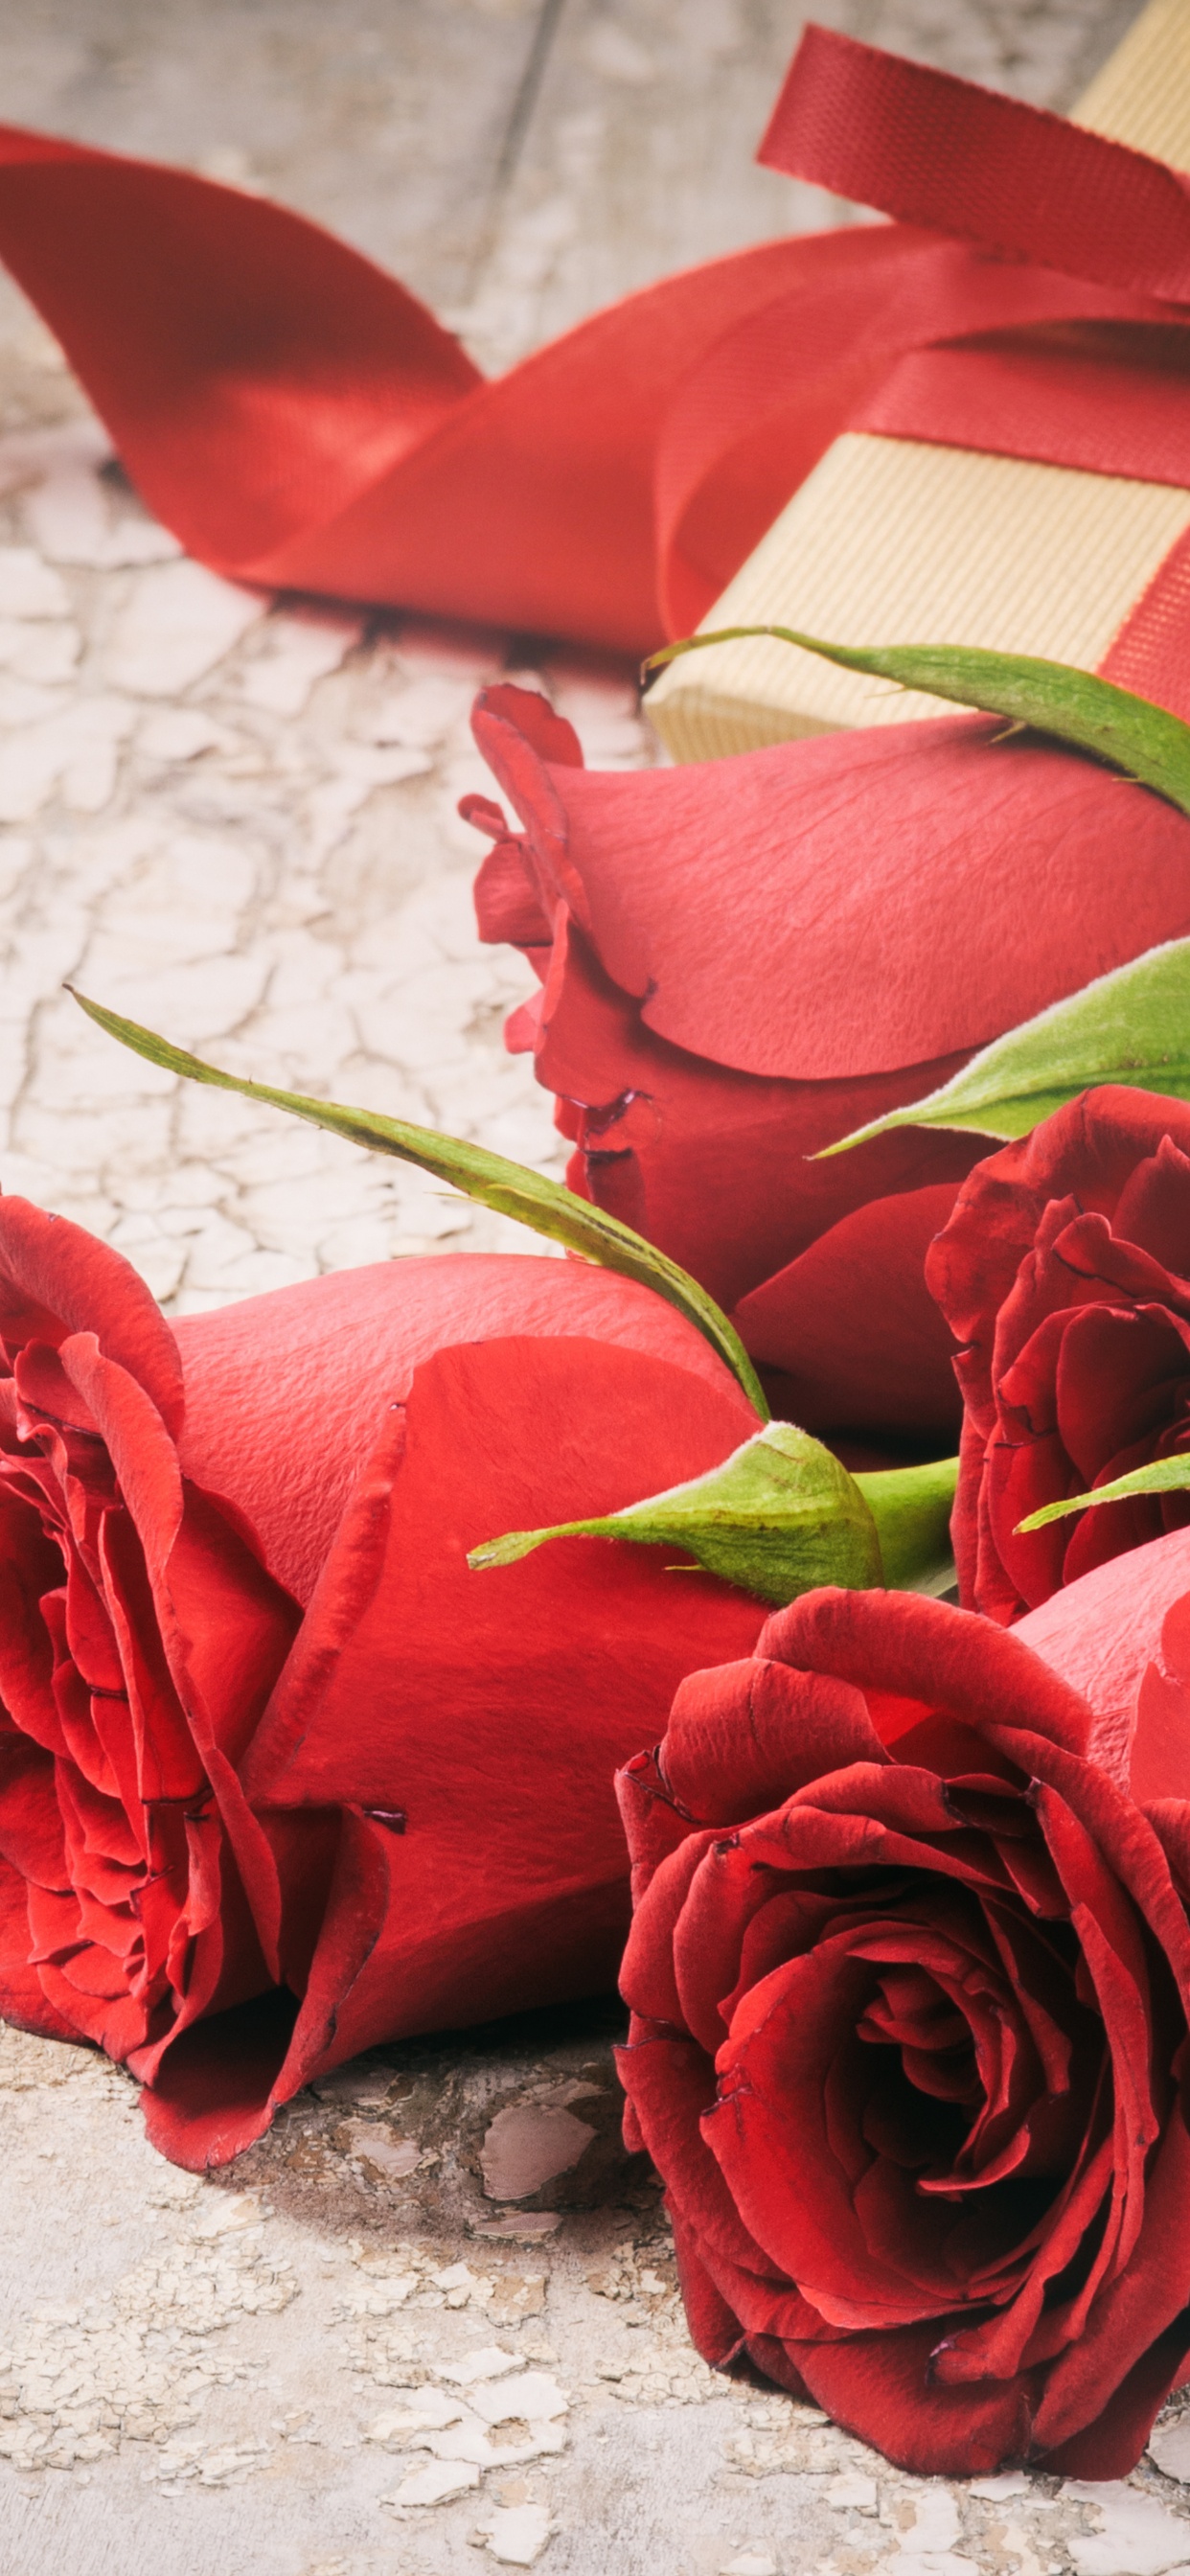 Roses Rouges Sur Textile Blanc. Wallpaper in 1242x2688 Resolution